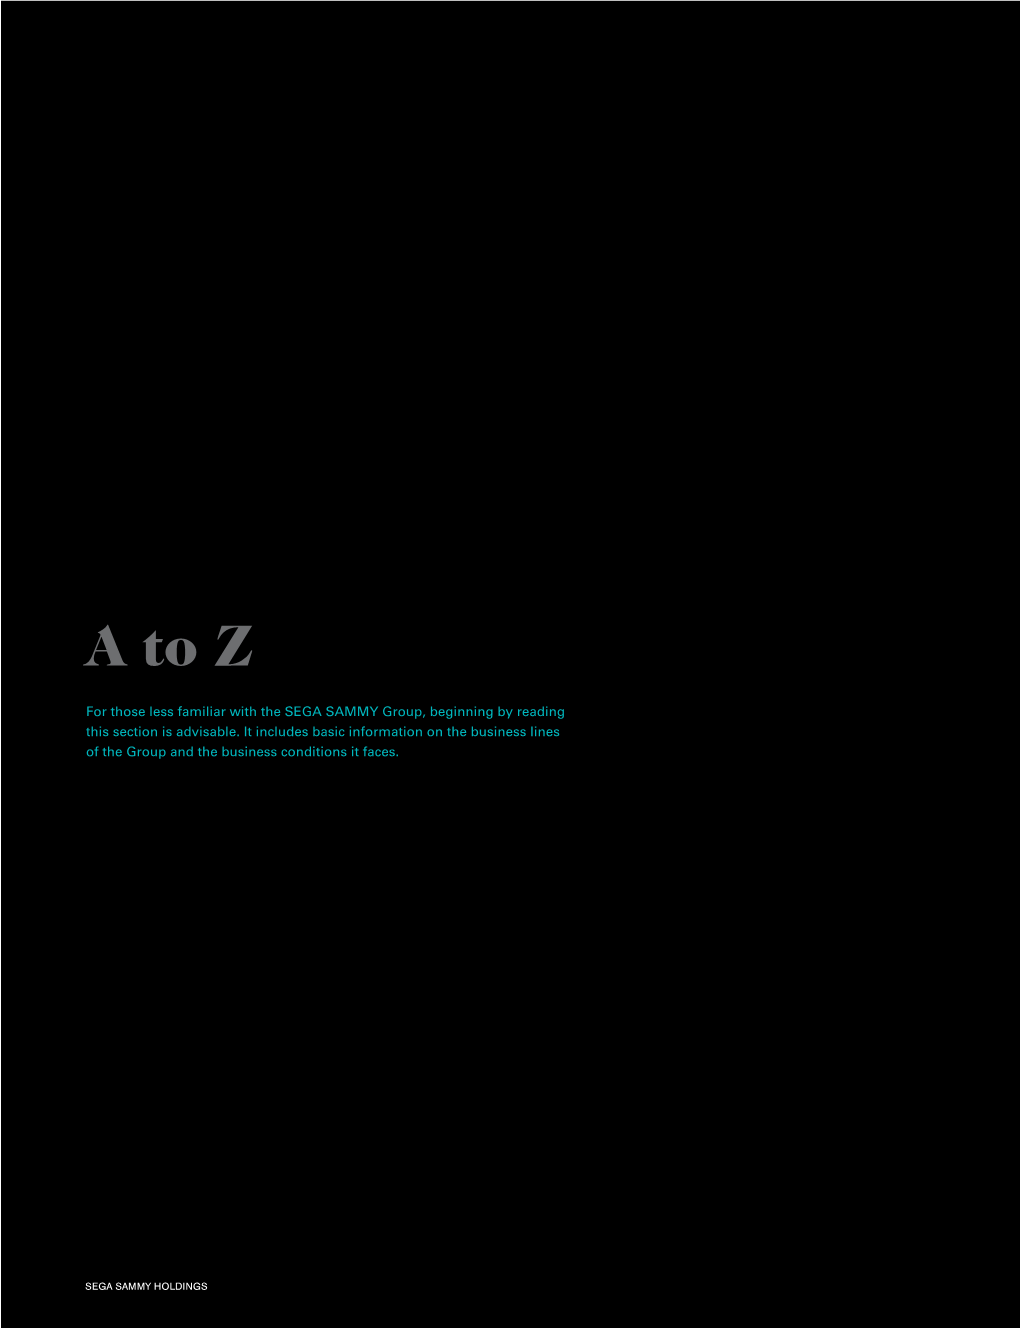 A to Z (428KB)